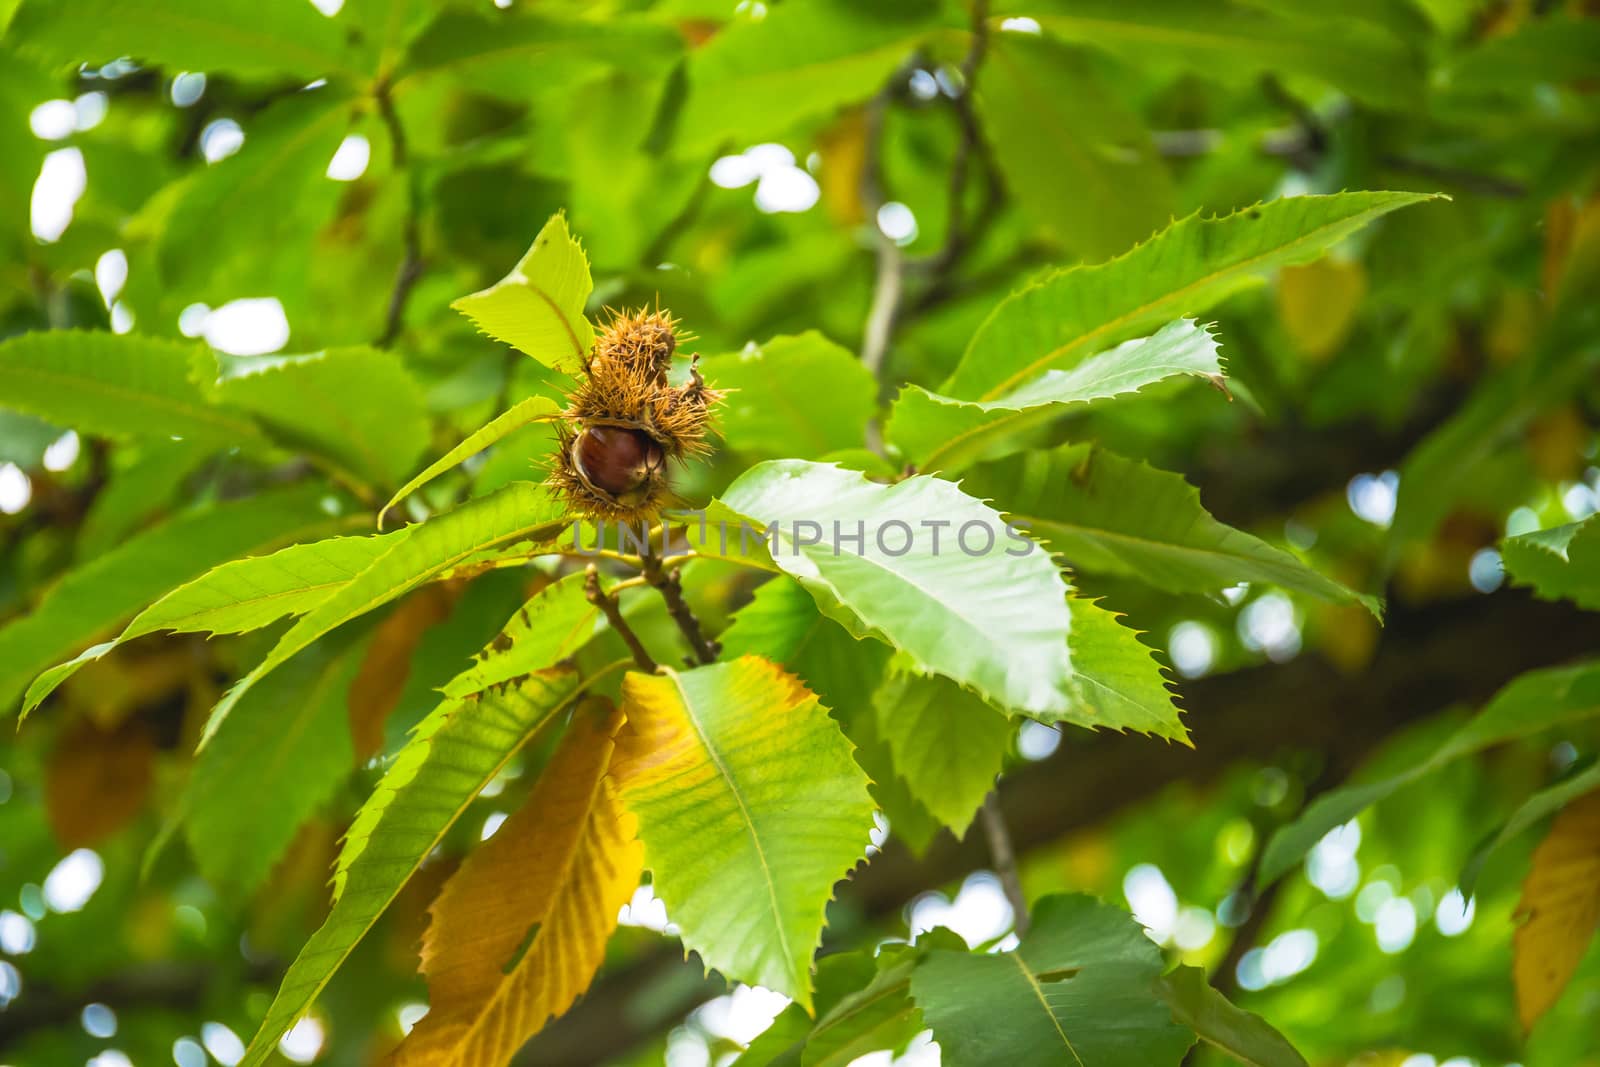 Nuts of Castanea sativa Miller, or sweet chestnut, is a species of flowering plant in the family Fagaceae. On a branch